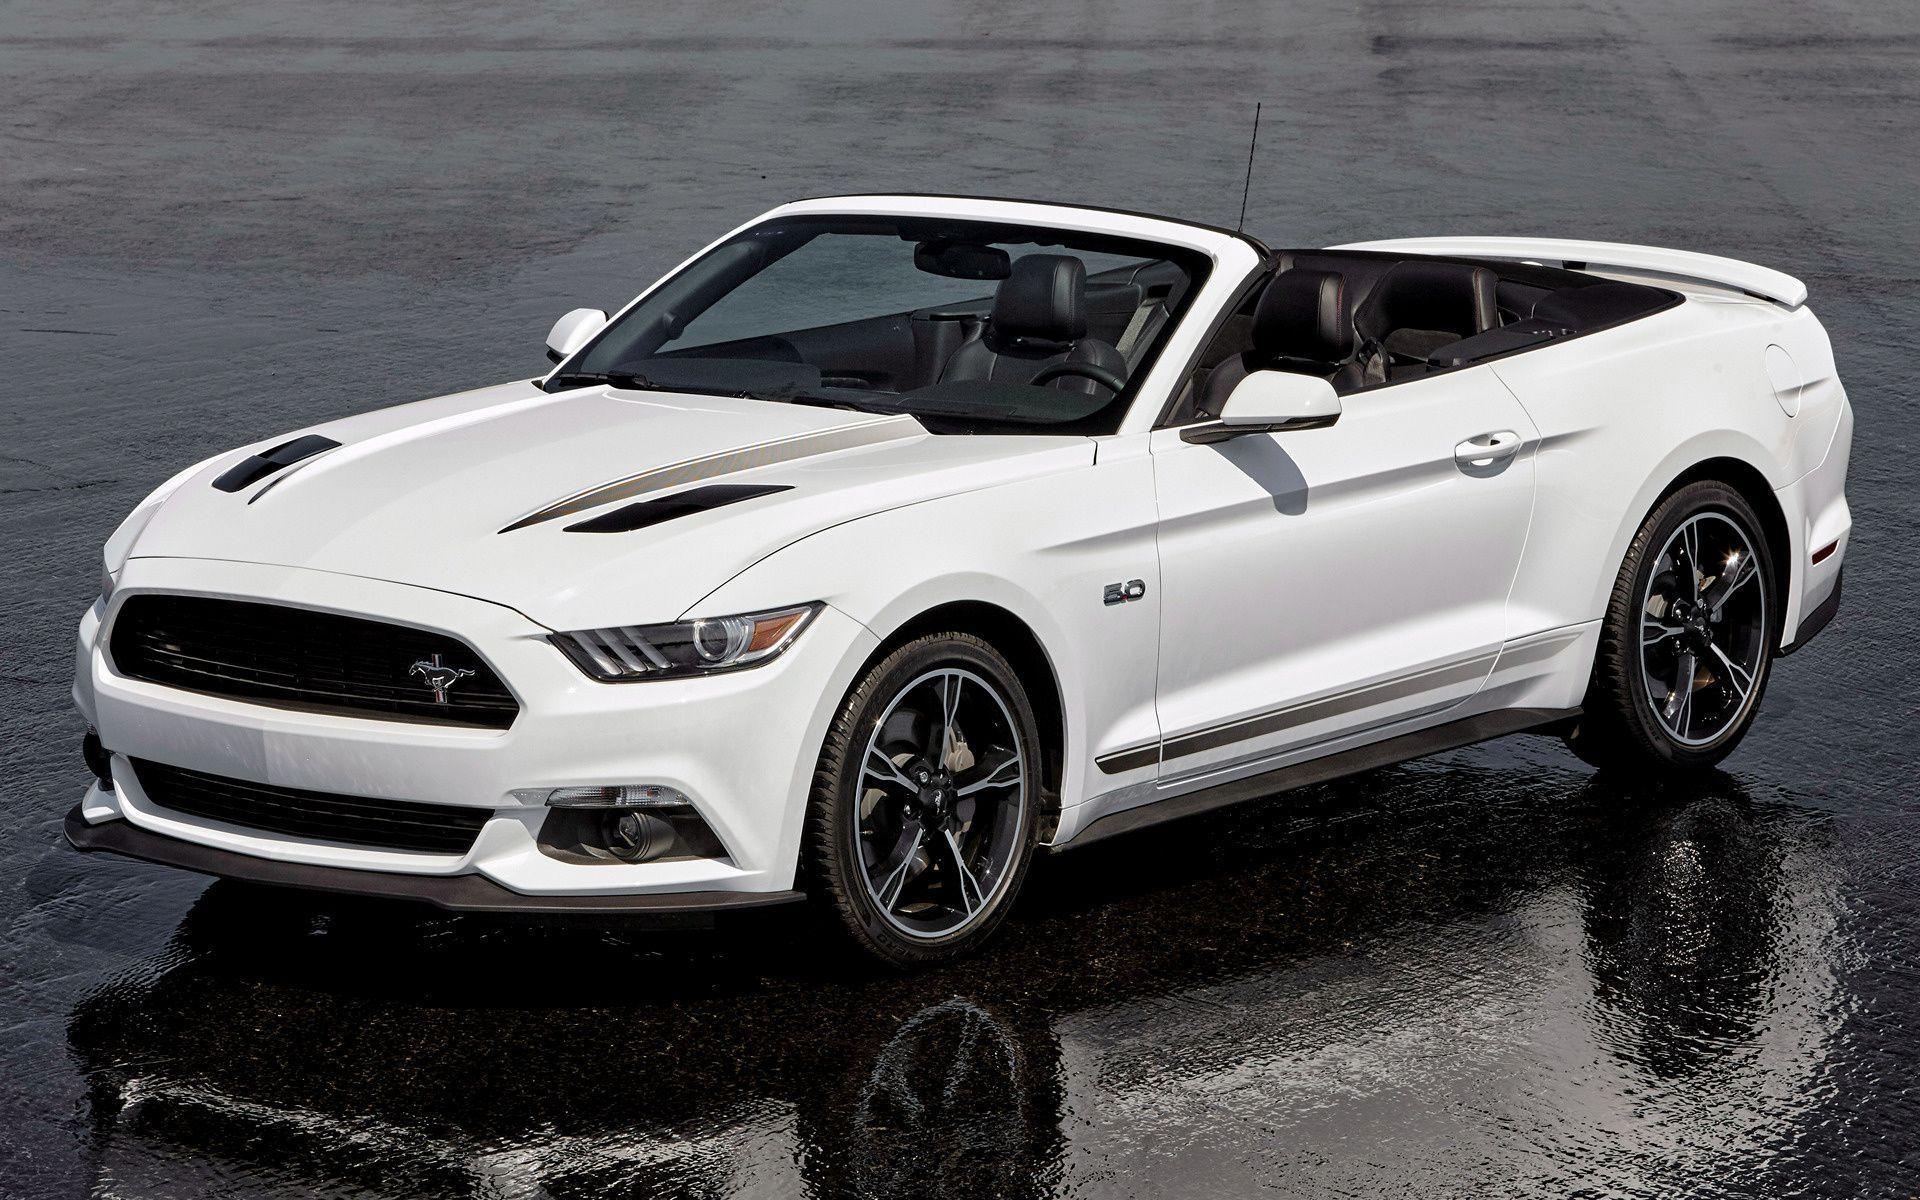 Ford Mustang GT Convertible California Special (2016) Wallpaper